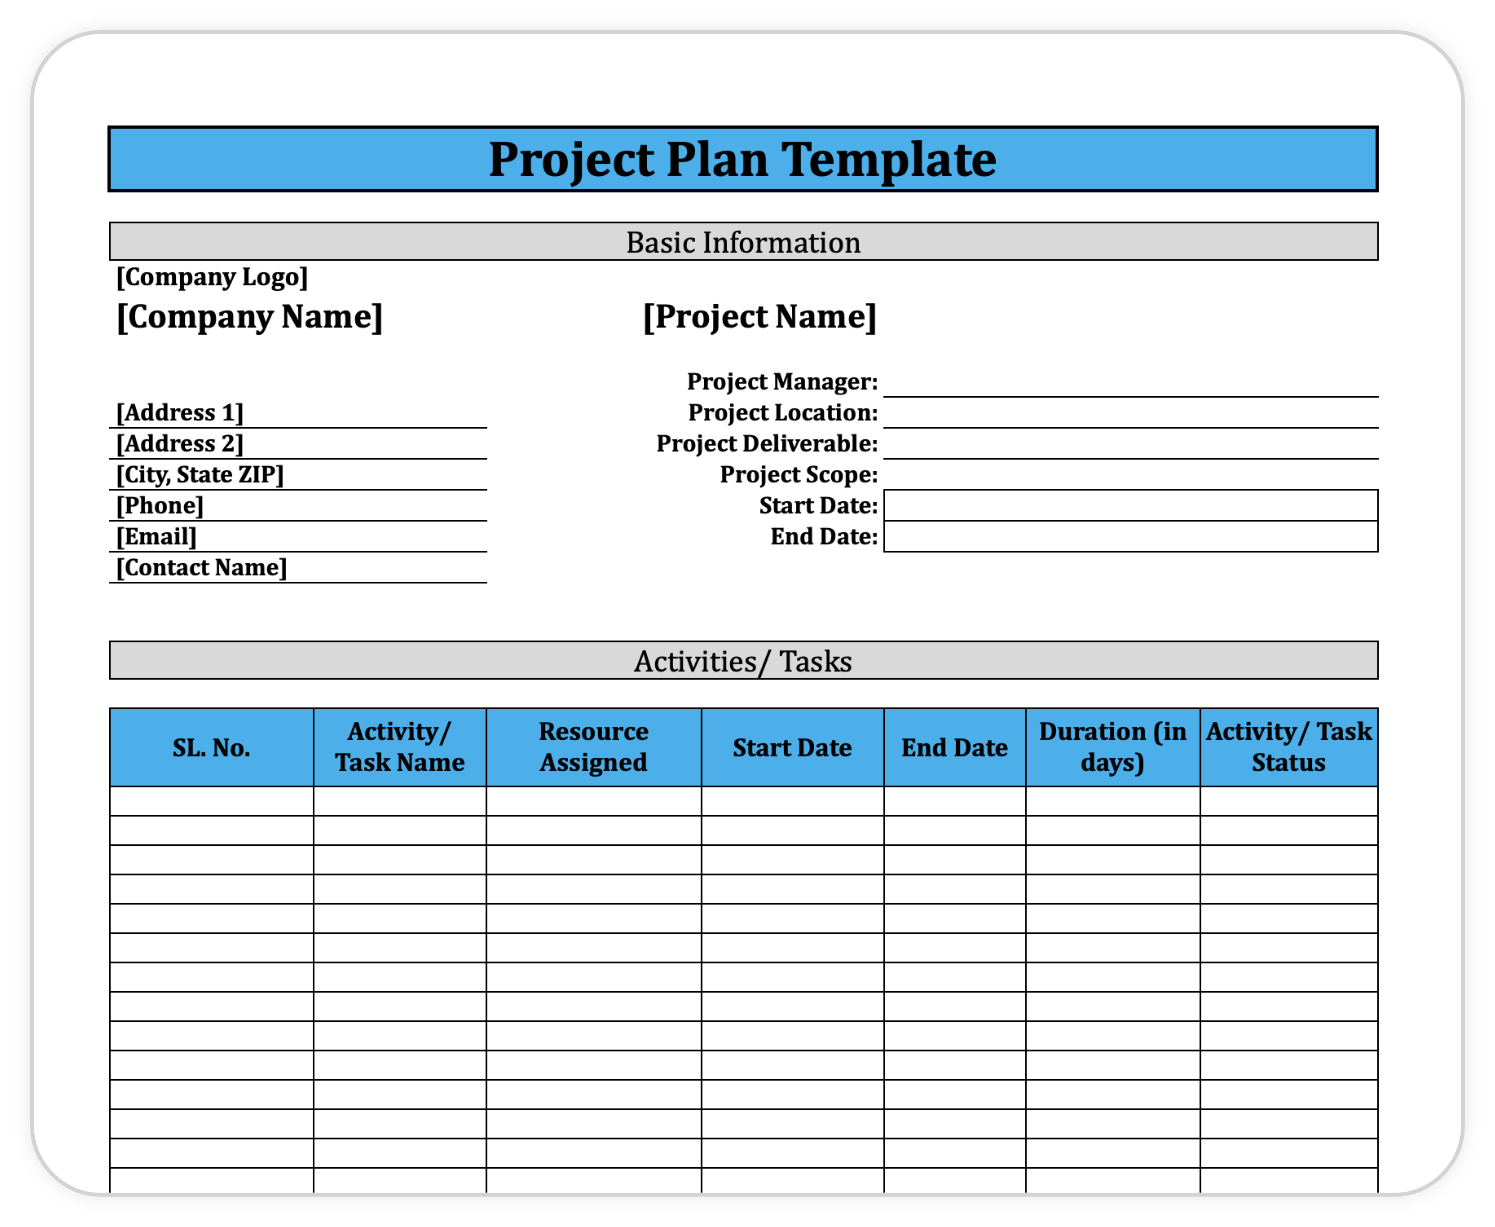 Project Plan Template for Microsoft Word